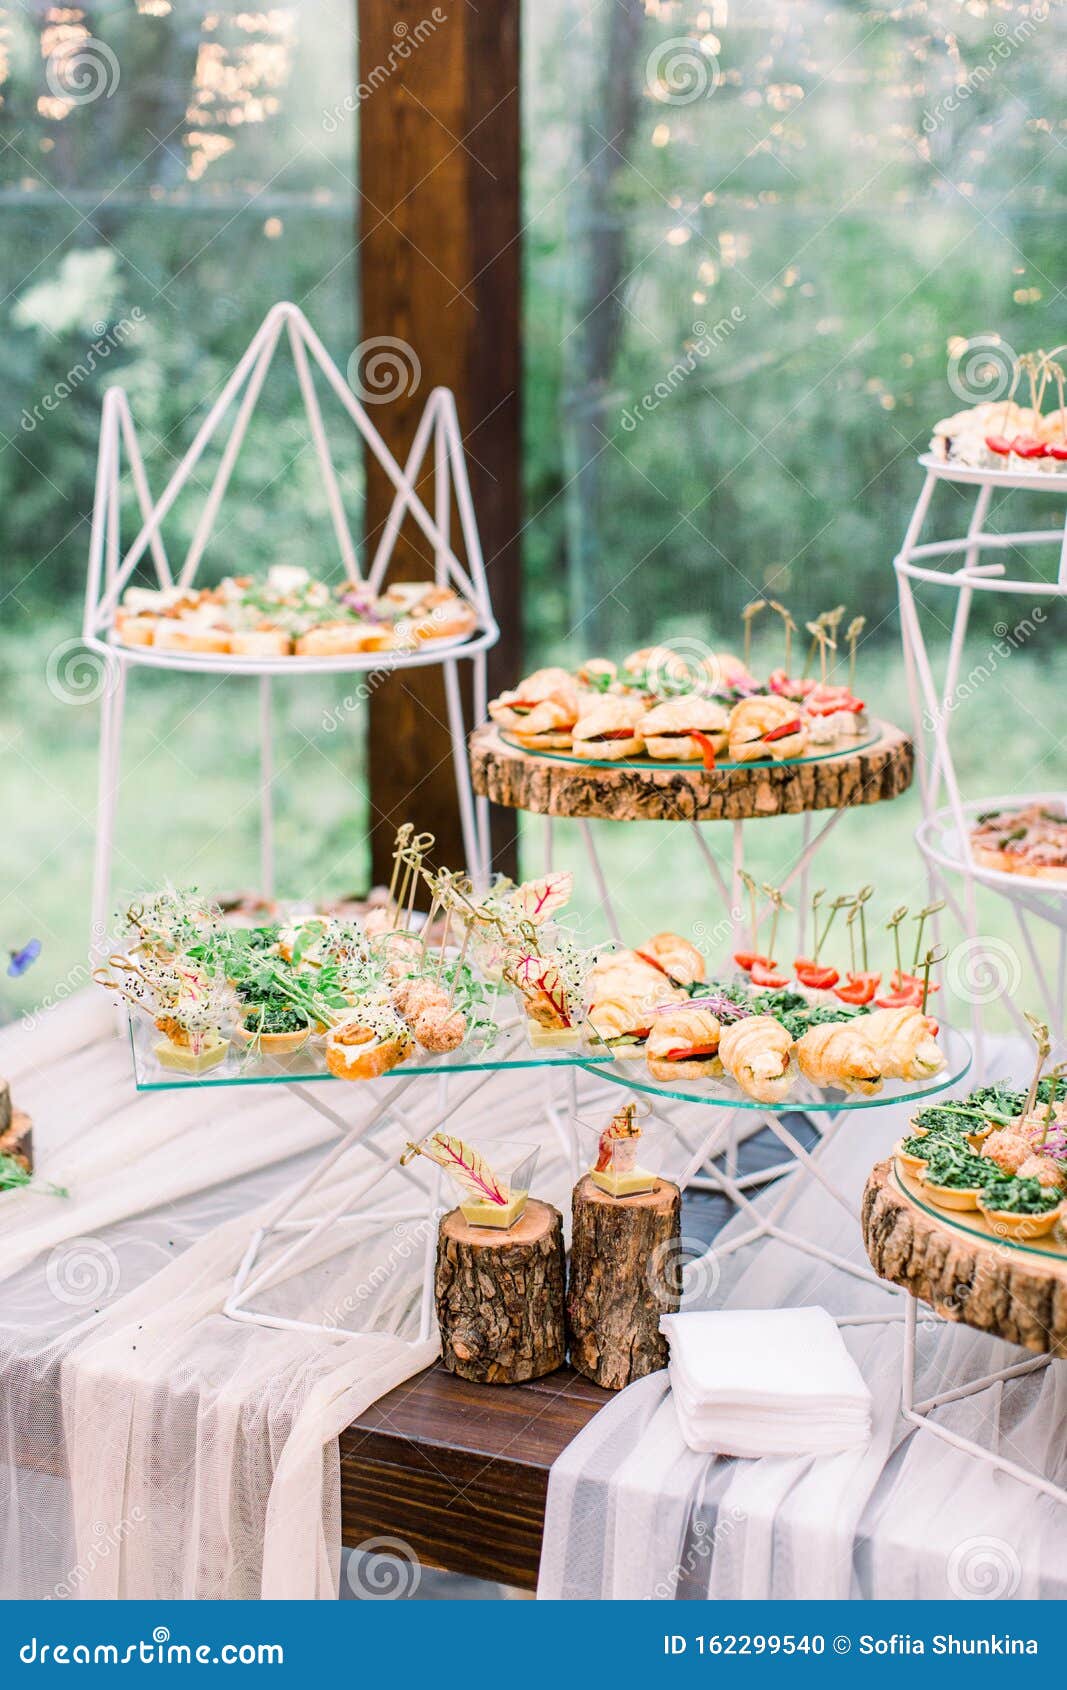 Food Buffet in Restaurant Outdoors in Rustic Eco Style, Snacks on the Glass  and Wooden Stands, Concept Catering Stock Photo - Image of arrangement,  dinner: 162299540